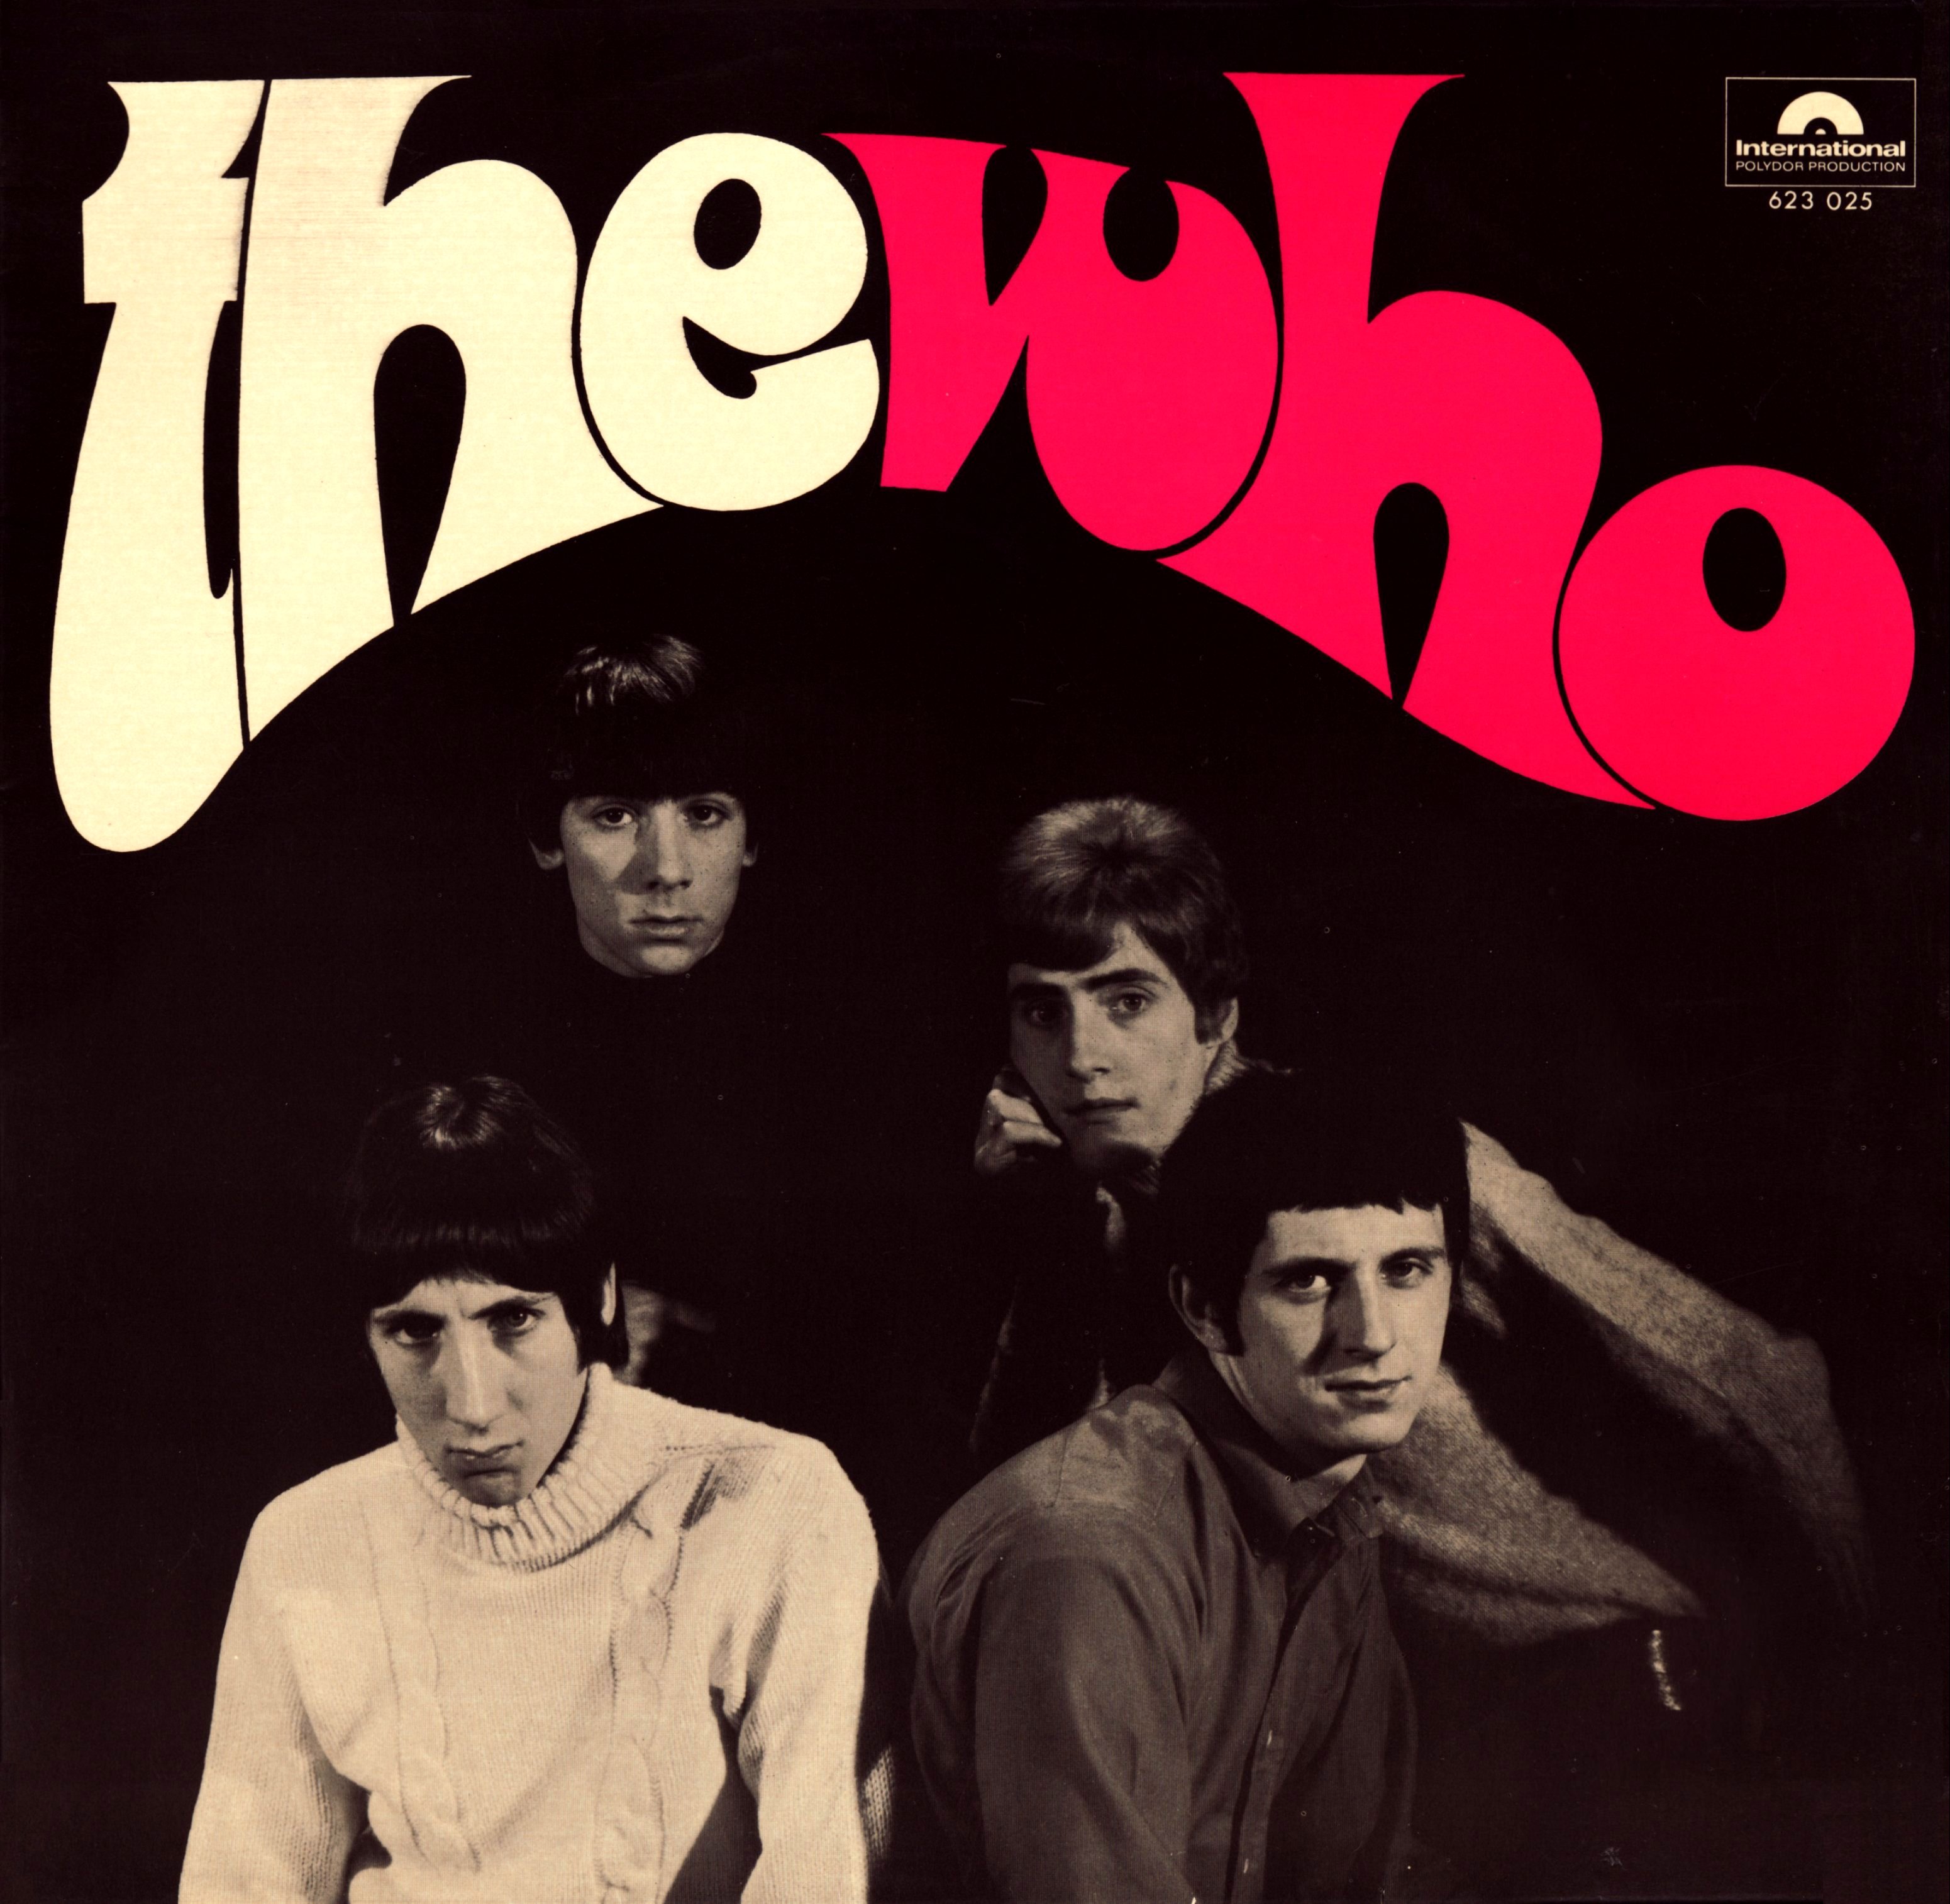 The Who — The Who | Last.fm